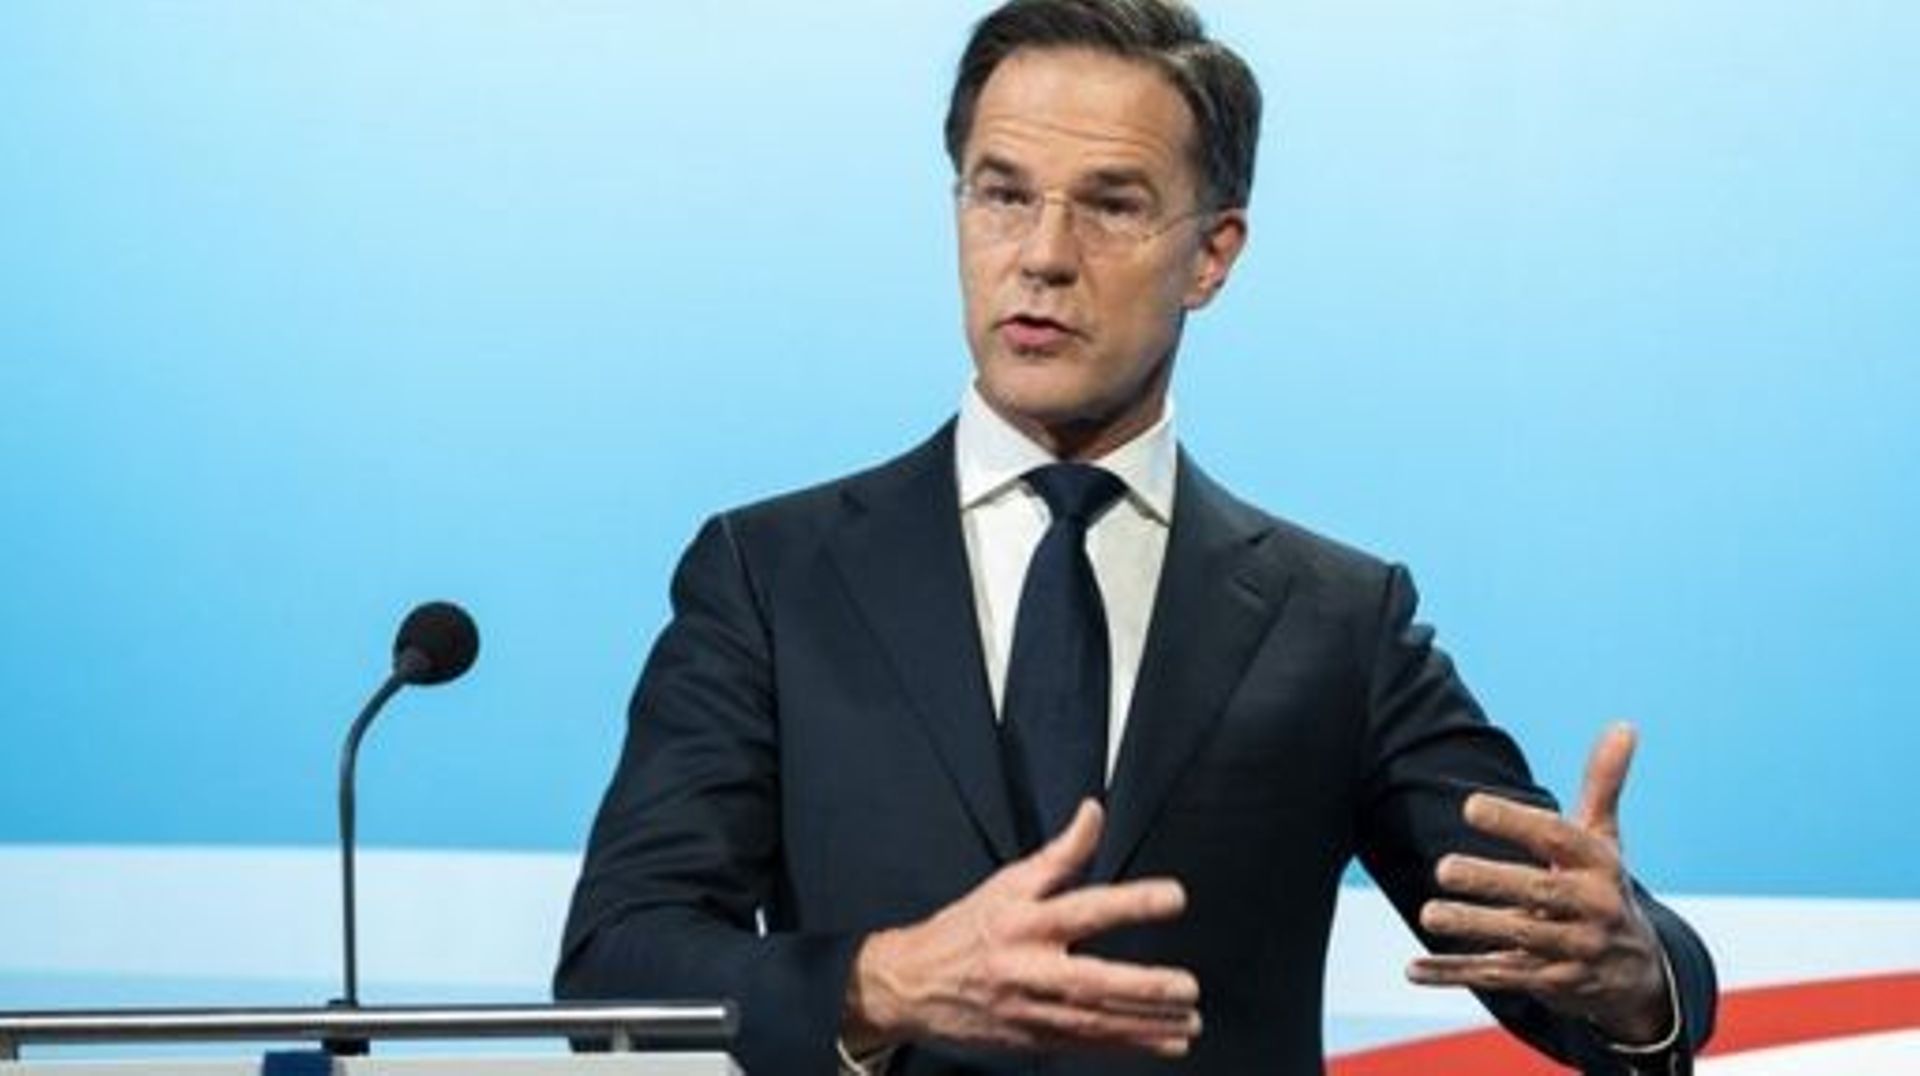 Prime Minister Mark Rutte addresses the press after the last weekly cabinet meeting of 2022, in The Hague on December 23, 2022. Lex van LIESHOUT / ANP / AFP